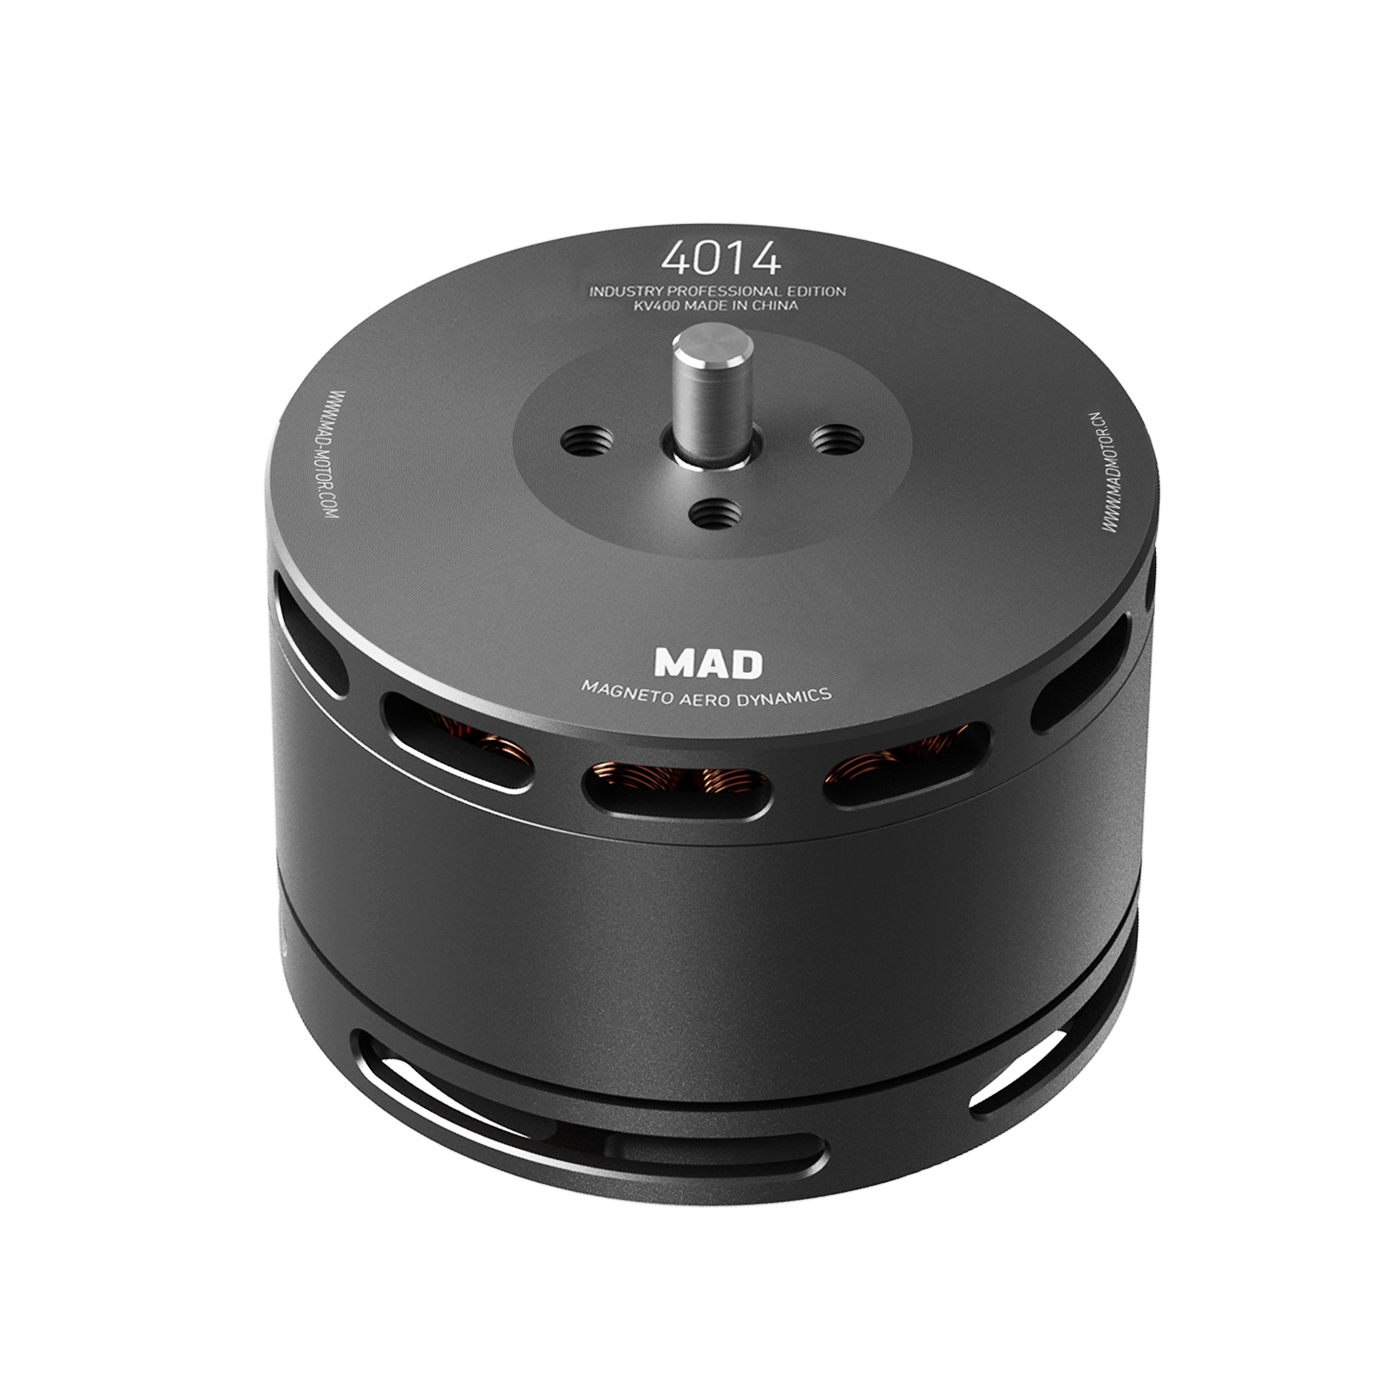 MAD 4014 IPE brushless motor for the long-range inspection drone mapping drone surveying drone quadcopter hexcopter mulitirotor